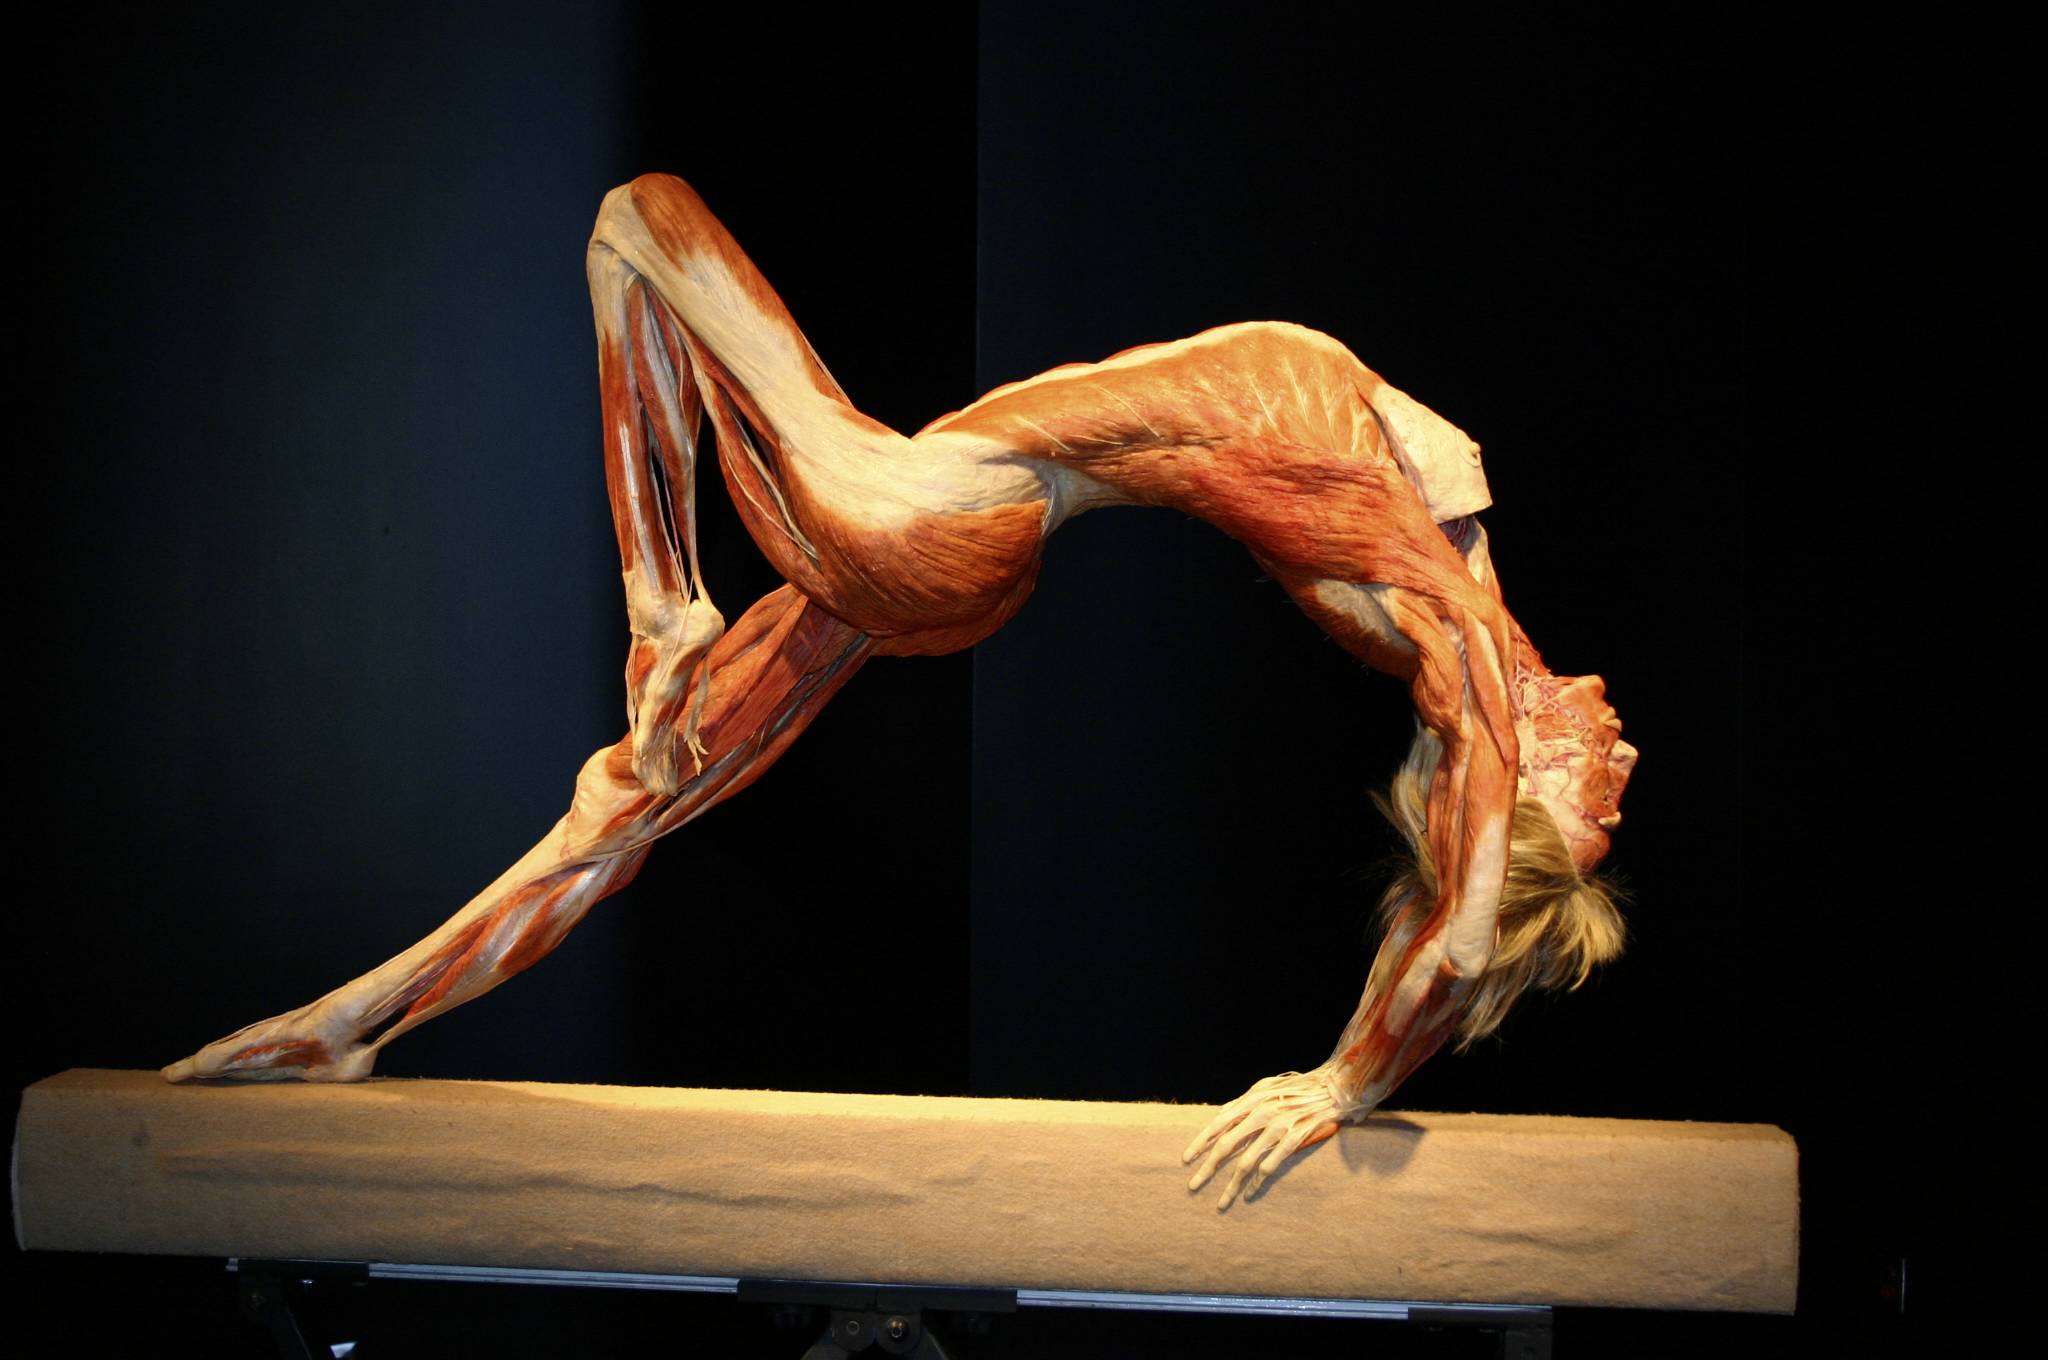 human body wallpaper,performance,acrobatics,muscle,joint,athletic dance move